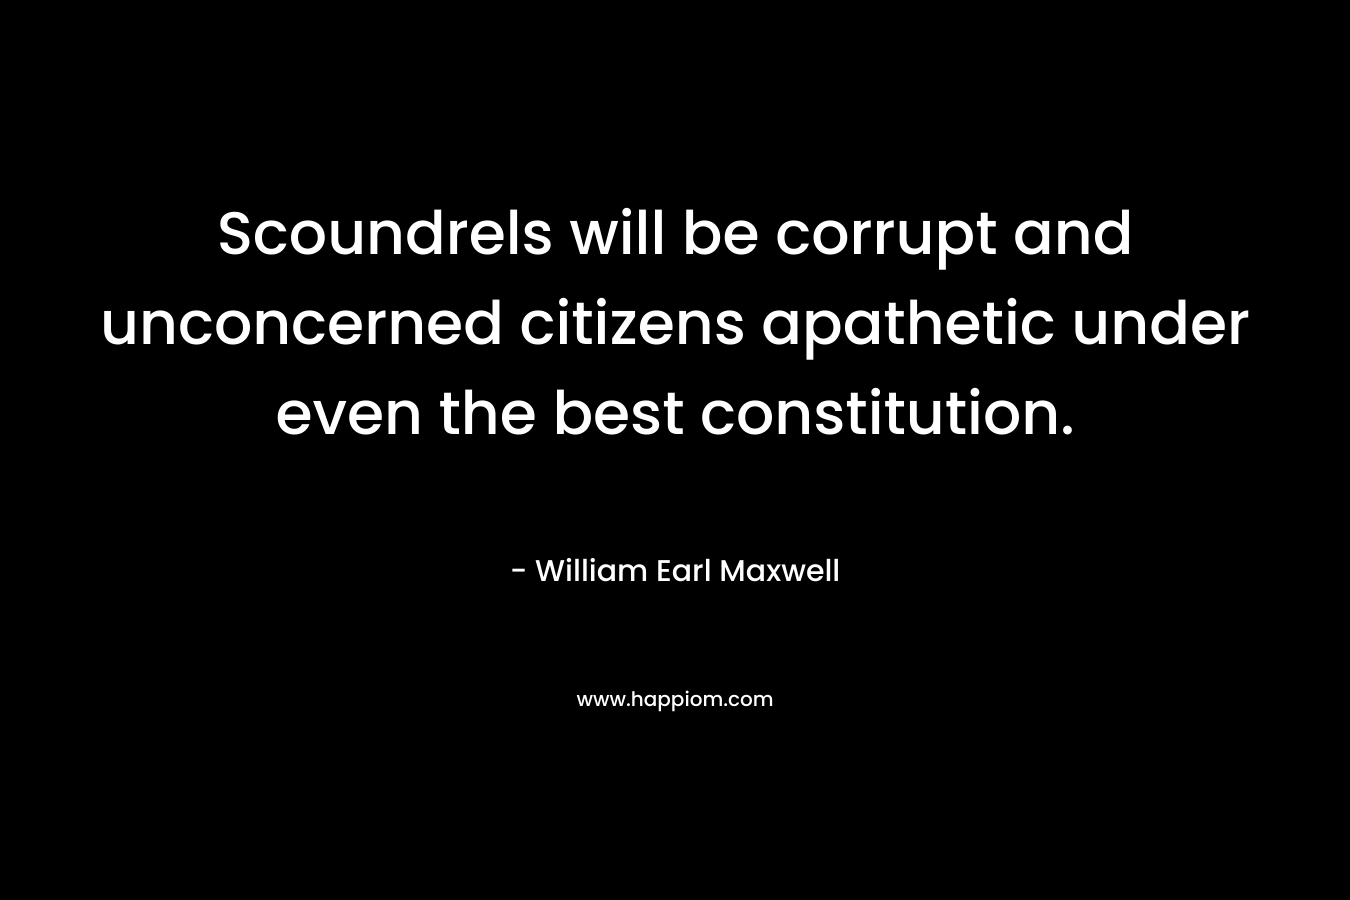 Scoundrels will be corrupt and unconcerned citizens apathetic under even the best constitution. – William Earl Maxwell